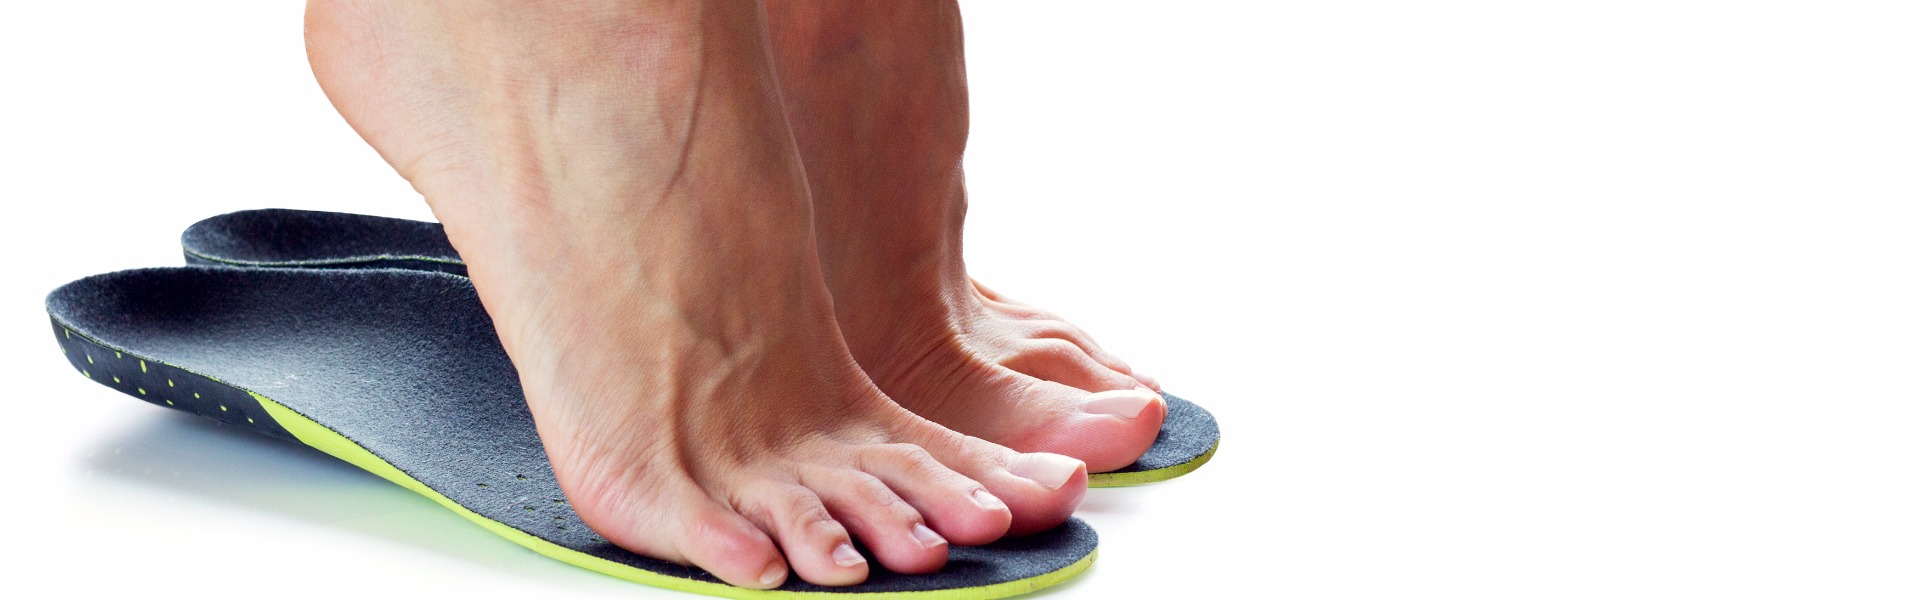 foot insoles near me